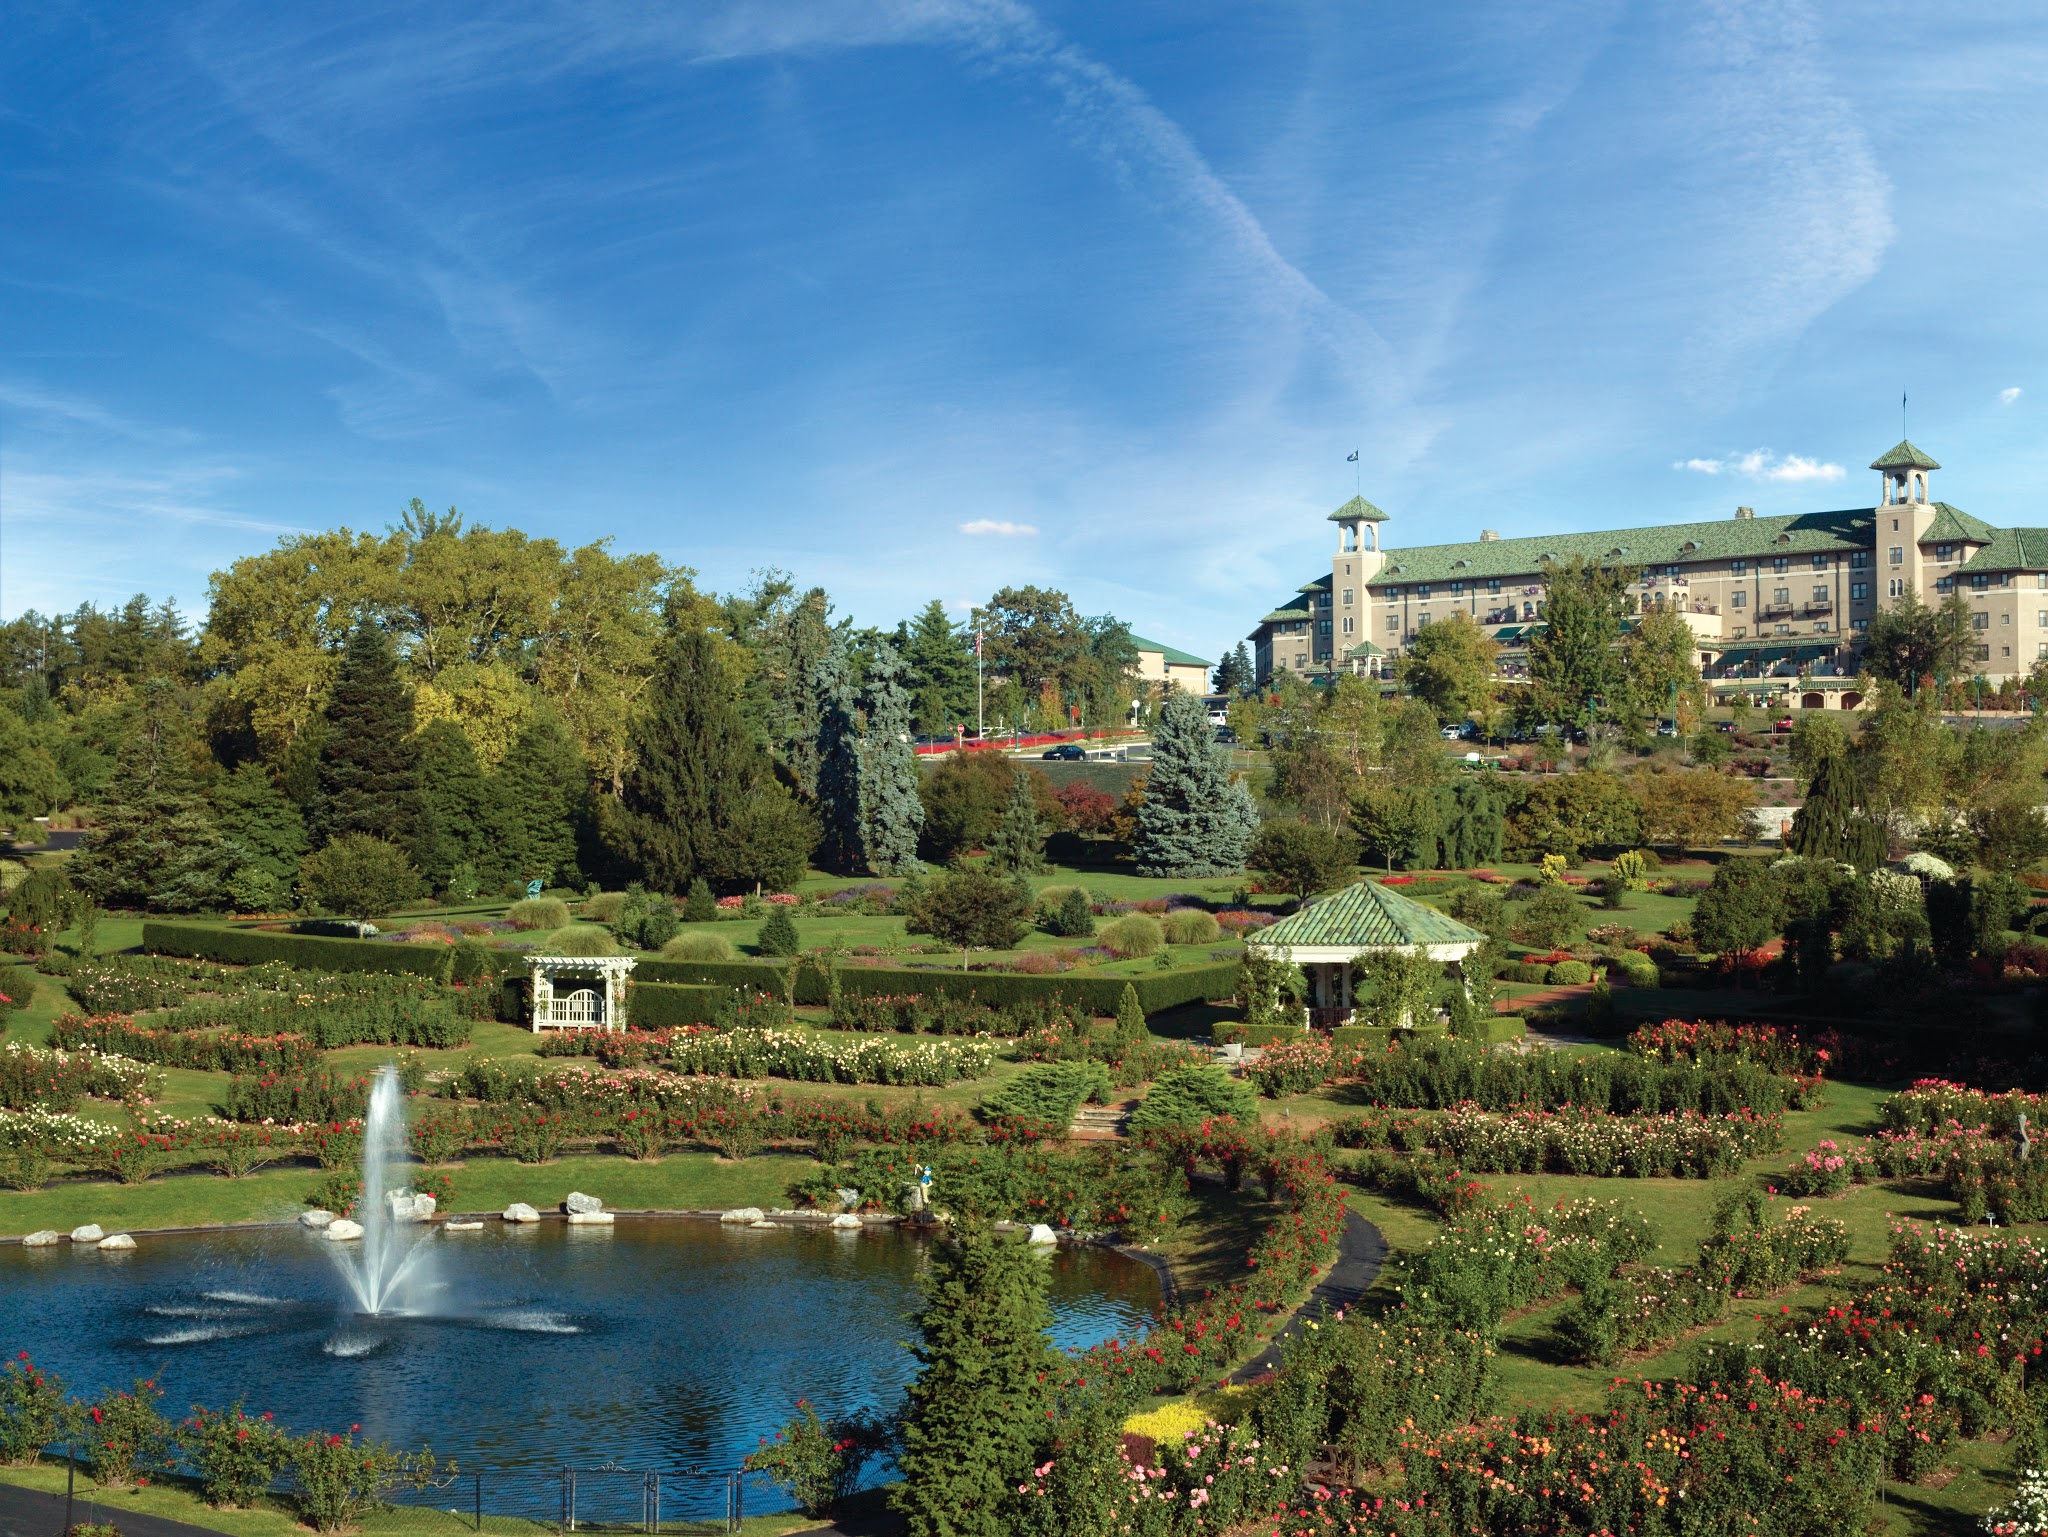 Picture of a place: Hershey Gardens